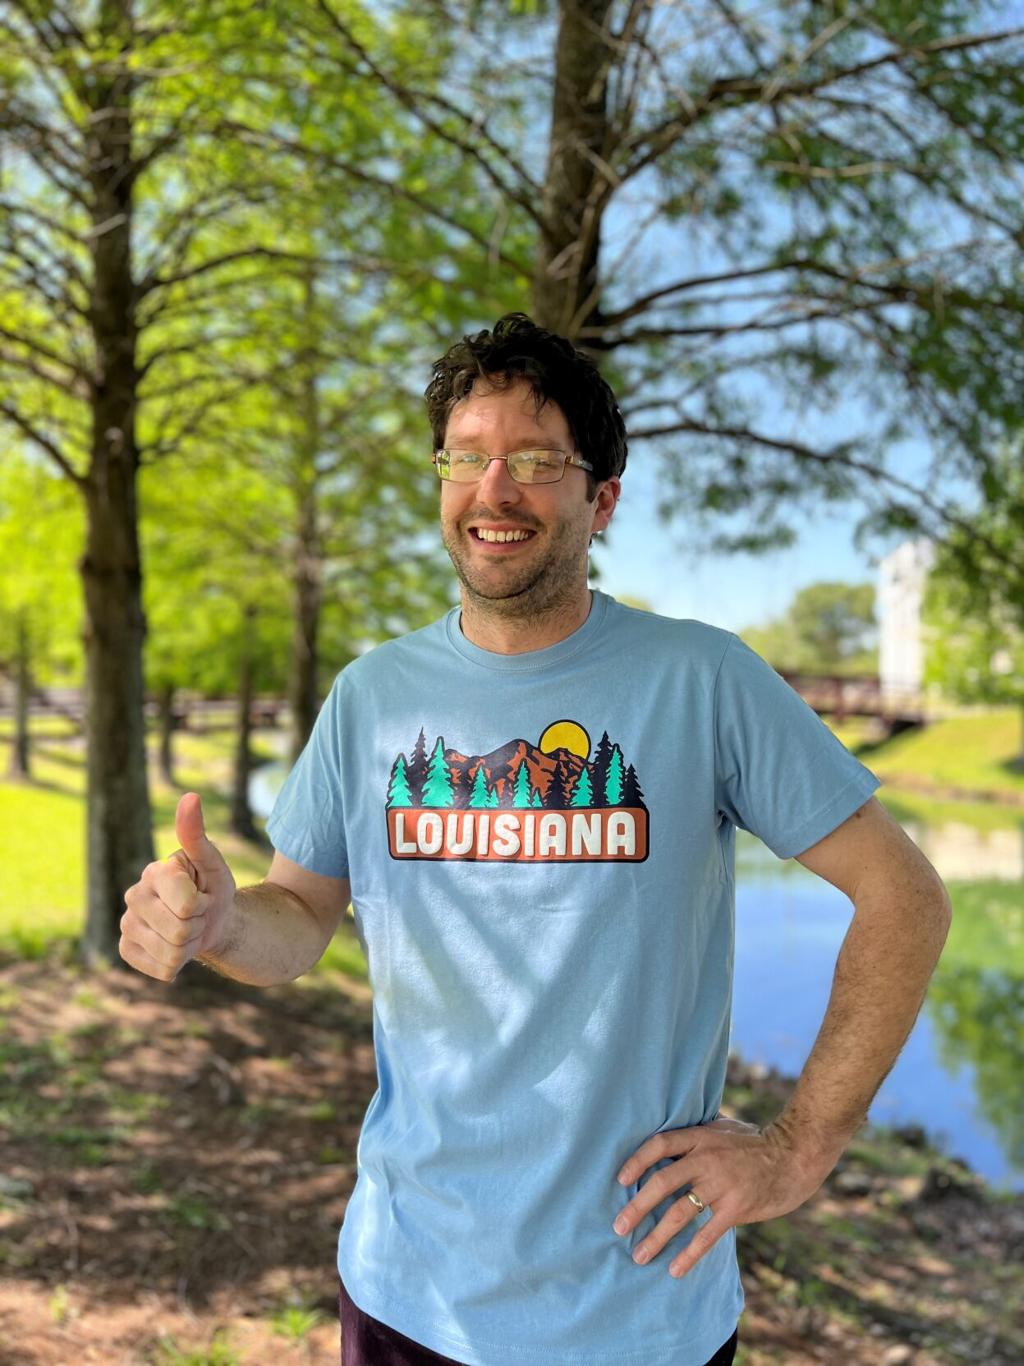 Mountains in Louisiana? A t-shirt says yes.